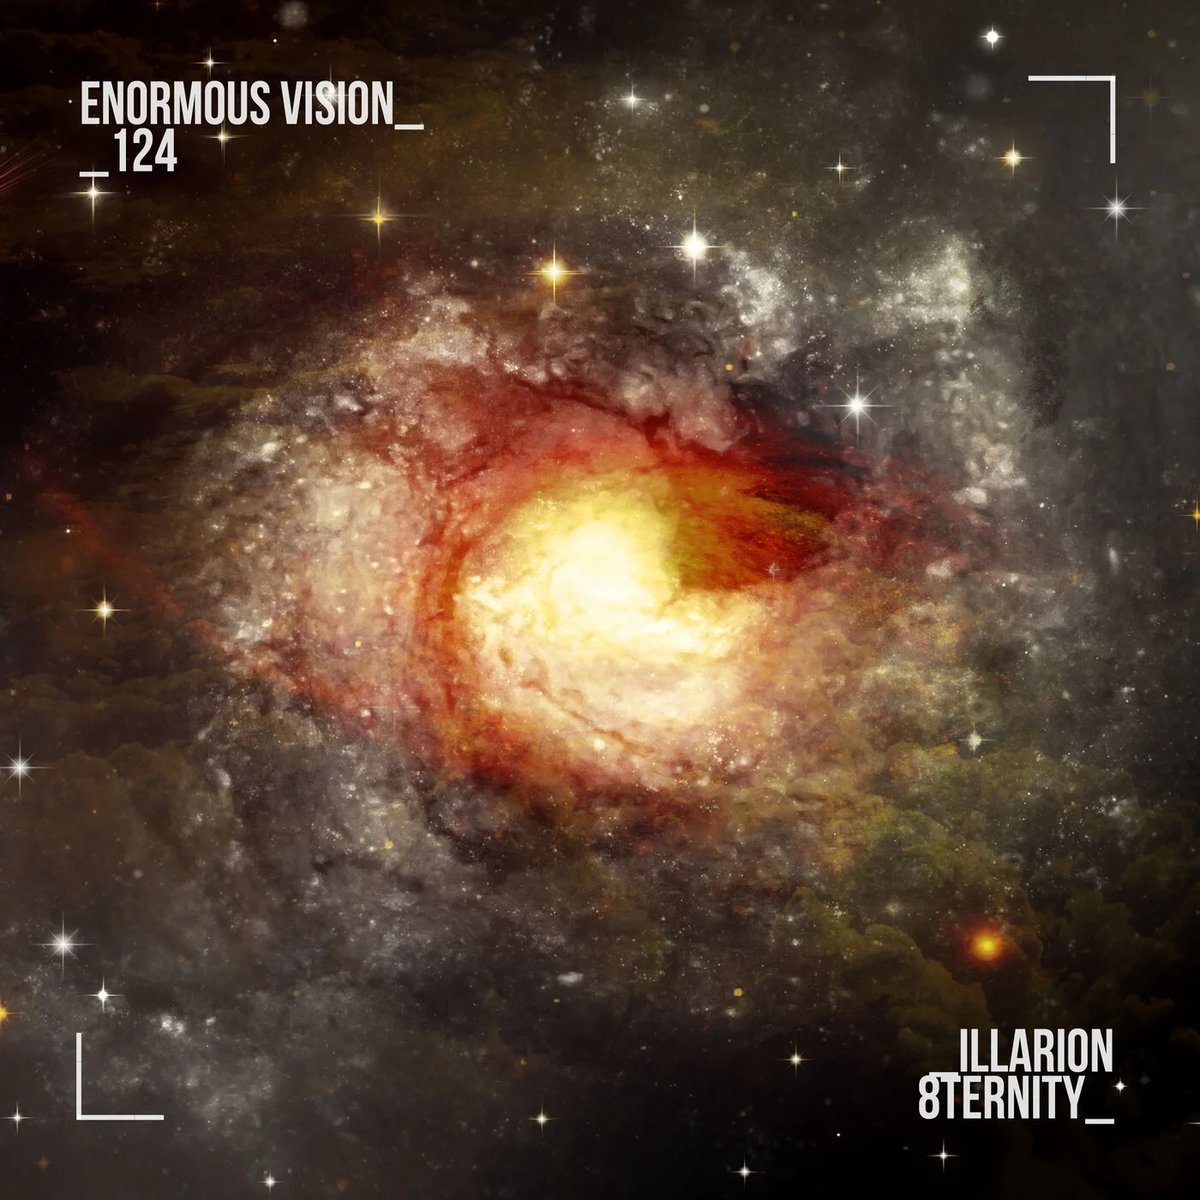 #SummerMelodies October 2023 | Live on di.fm/melodicprogres… #Illarion Guest Mix 3. Illarion - 8ternity [Enormous Vision] #EnormousVision #MeloProg #MelodicHouse #ProgressiveHouse #ProgHouse #GuestMix